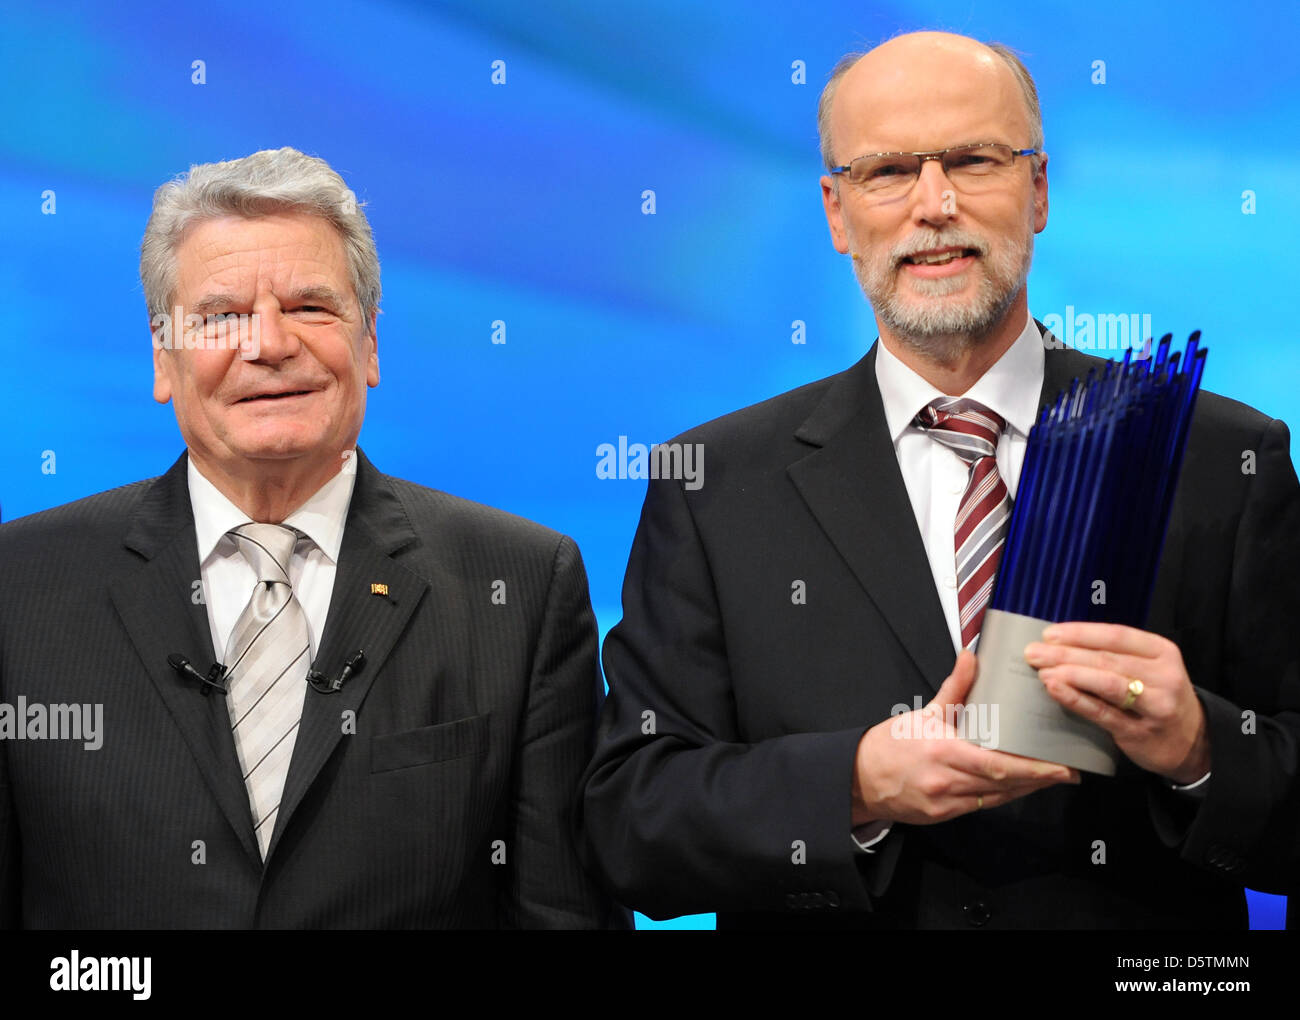 German Presdient Joachim Gauck (L) hands over the German Future Prize 2012 to physicist Birger Kollmeier in Berlin, Germany, 28 November 2012. The prize was awarded for binaural hearing aids which make possible spatial hearing. The prize has been awarded since 1997 and is endowed with 250,000 euro. It is awarded for outstanding techincal, engineering or scientific innovations. Phot Stock Photo